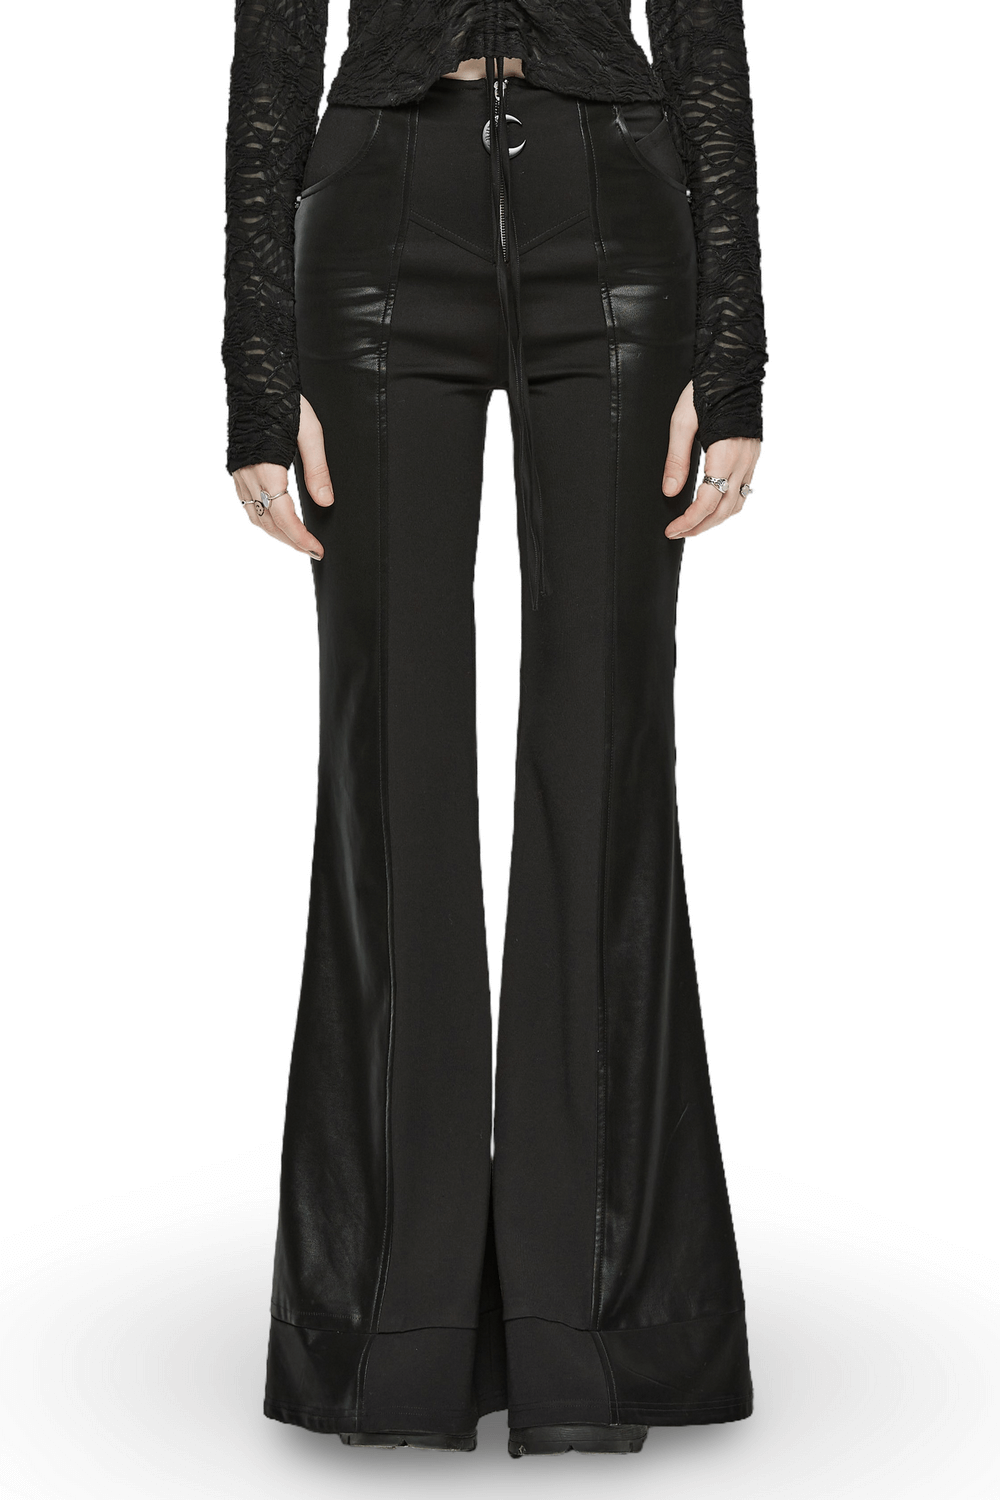 Flare Pants: High Waist Spliced with Punk Details